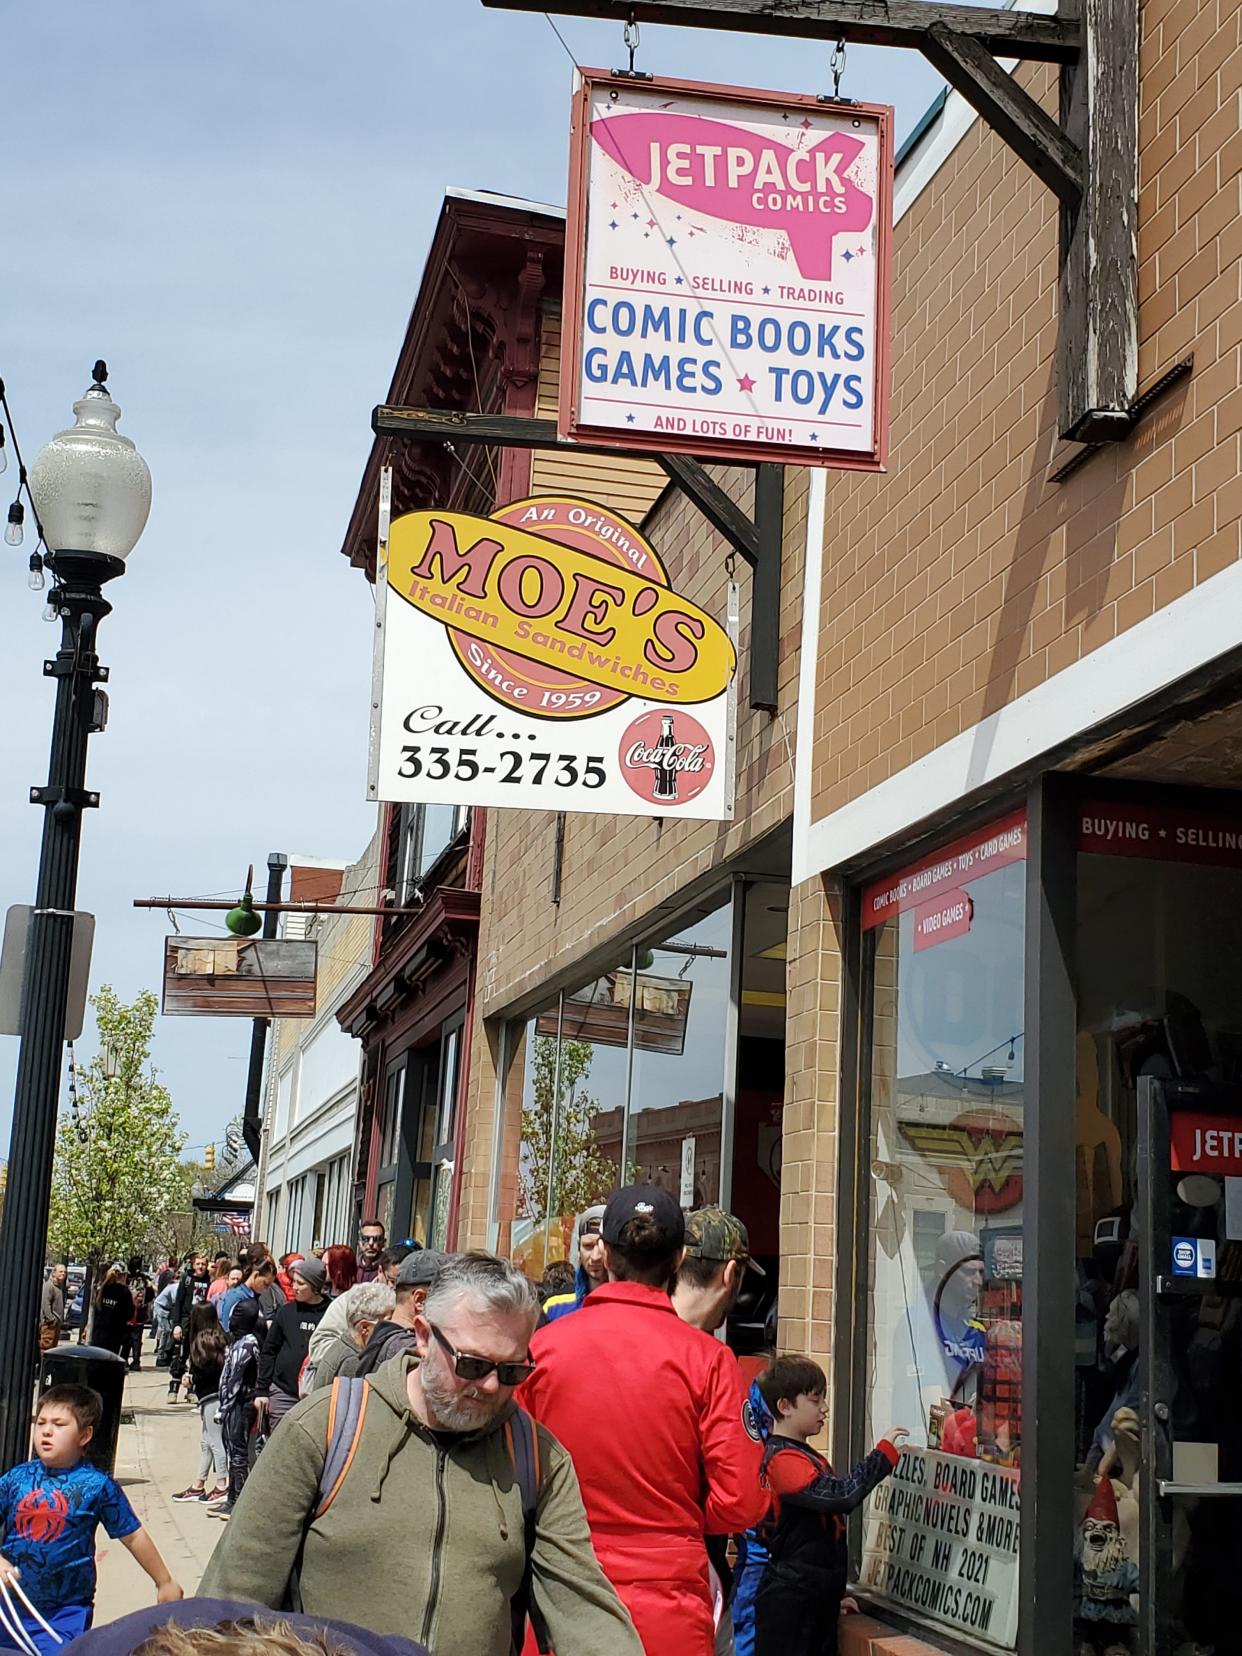 The line waiting to enter Jetpack Comics stretches out of sight as people came for Free Comic Book Day in Rochester Saturday, May 7, 2022.